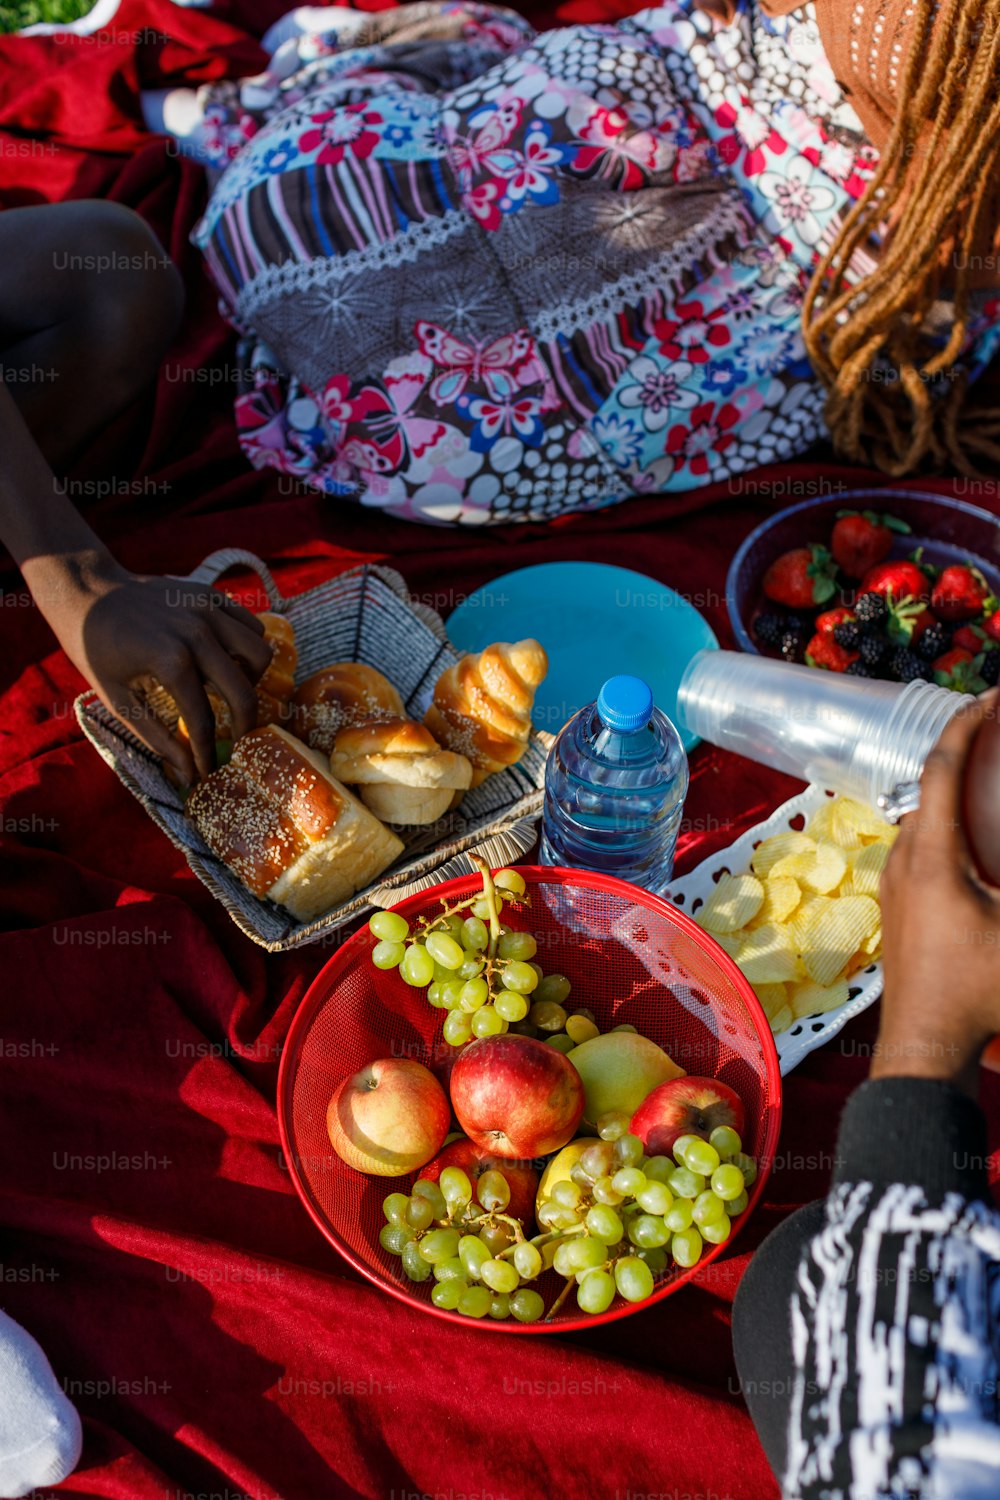 a person sitting on a blanket with a plate of food